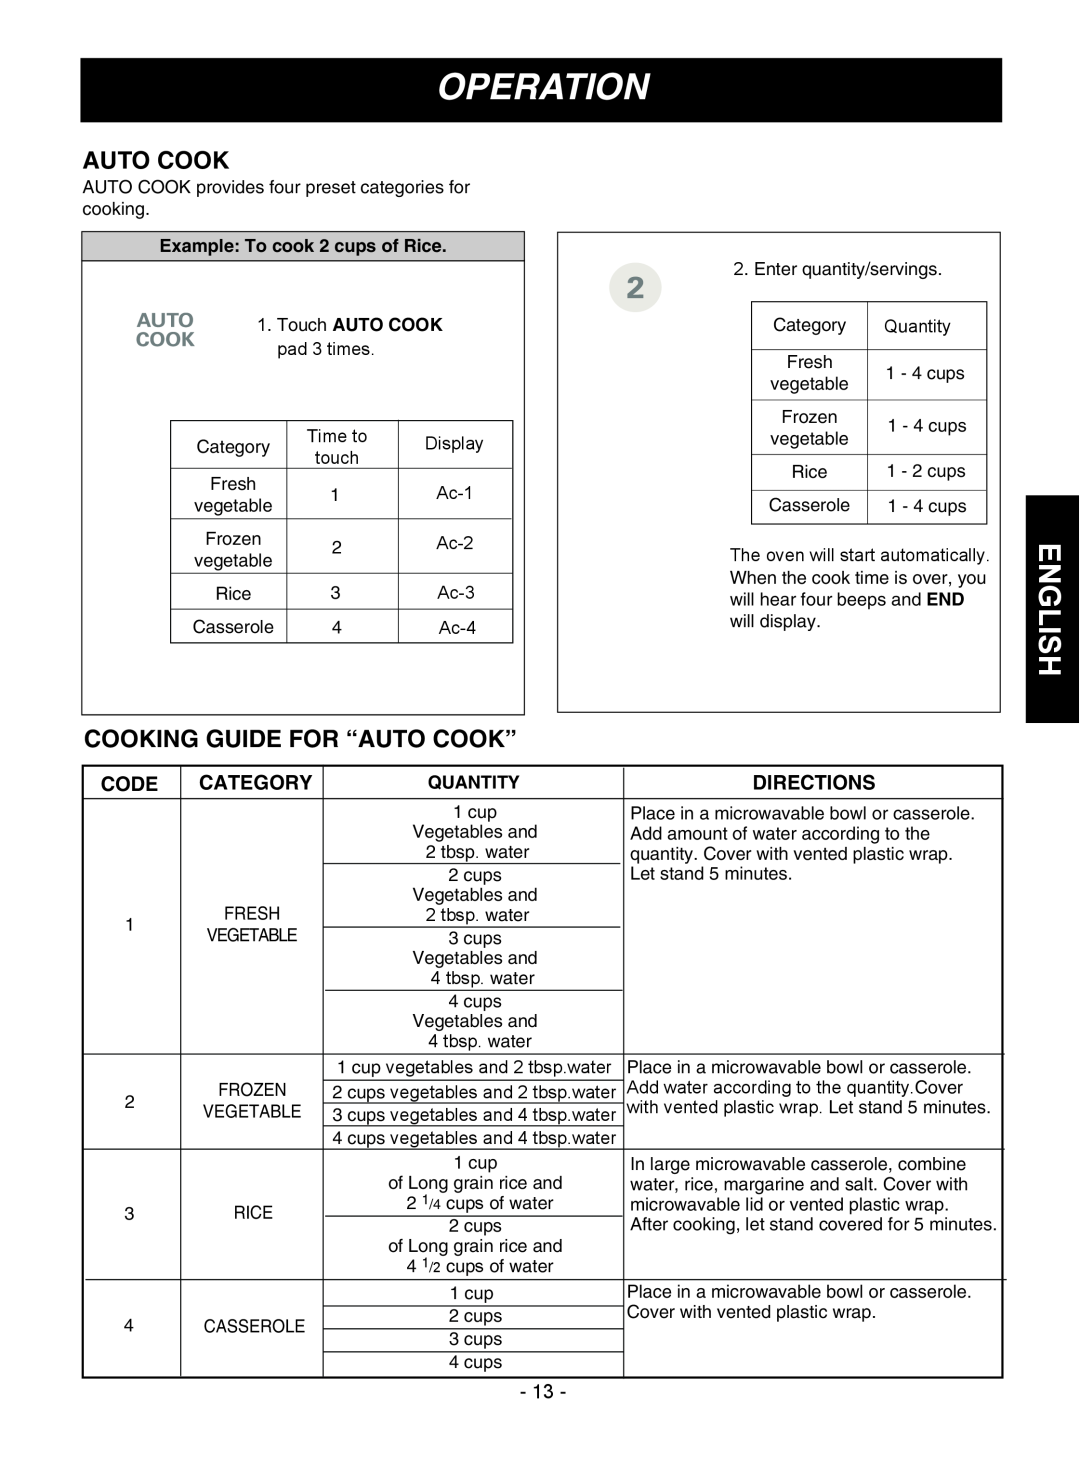 Goldstar MVH1615WW owner manual Cooking Guide For “Auto Cook”, Code Category, Directions, Operation, English 